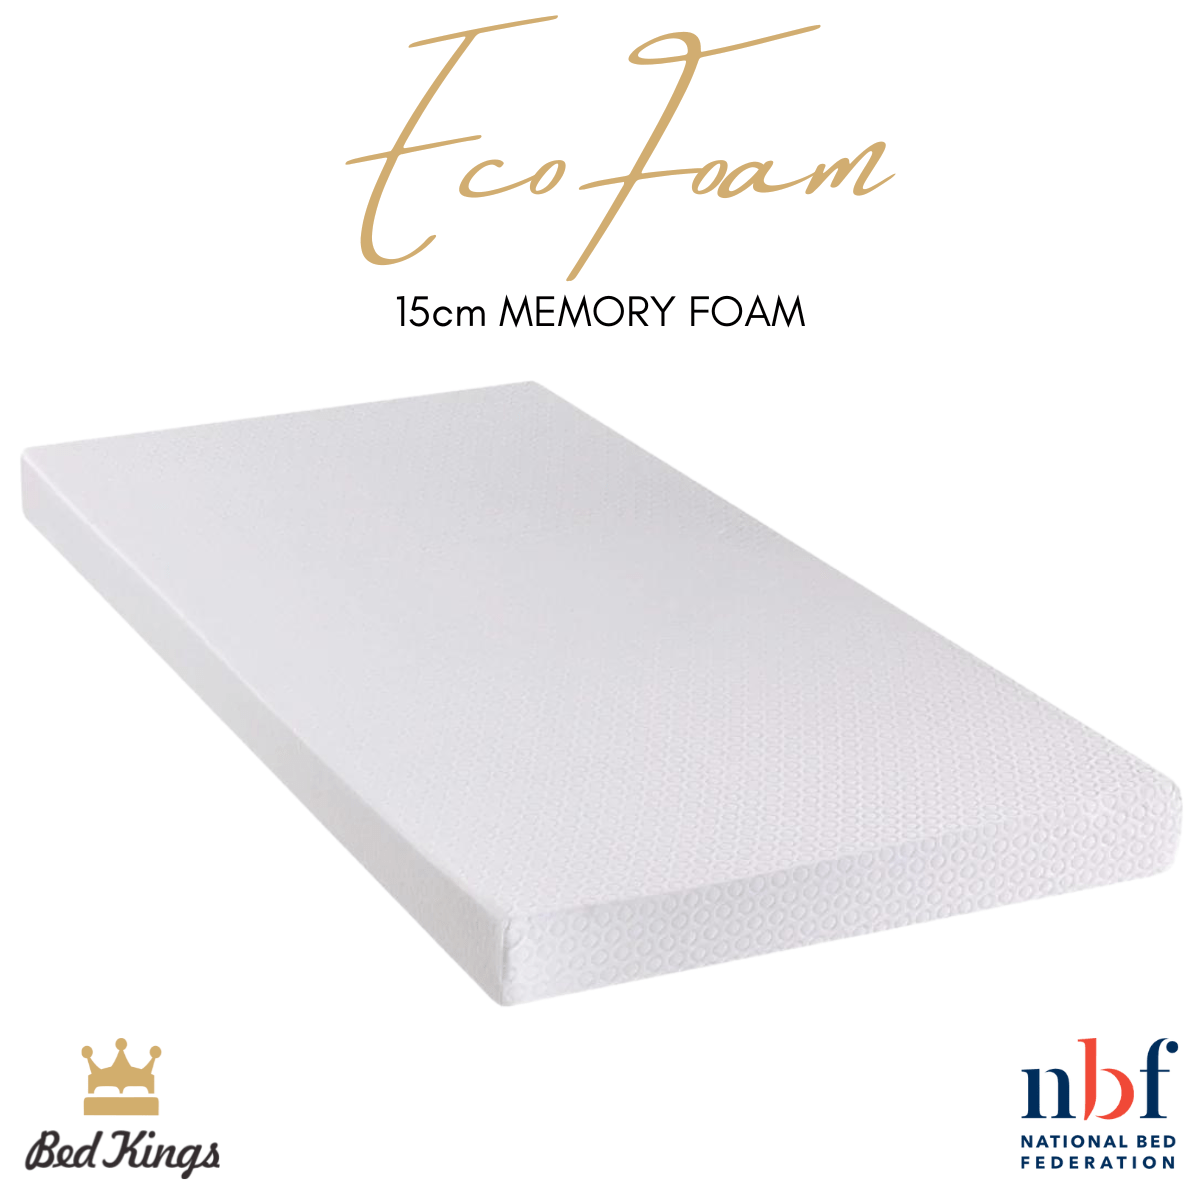 Bed Kings Mattress 15cm Eco Foam Mattress - For Bunk Beds & Day Beds Bed Kings